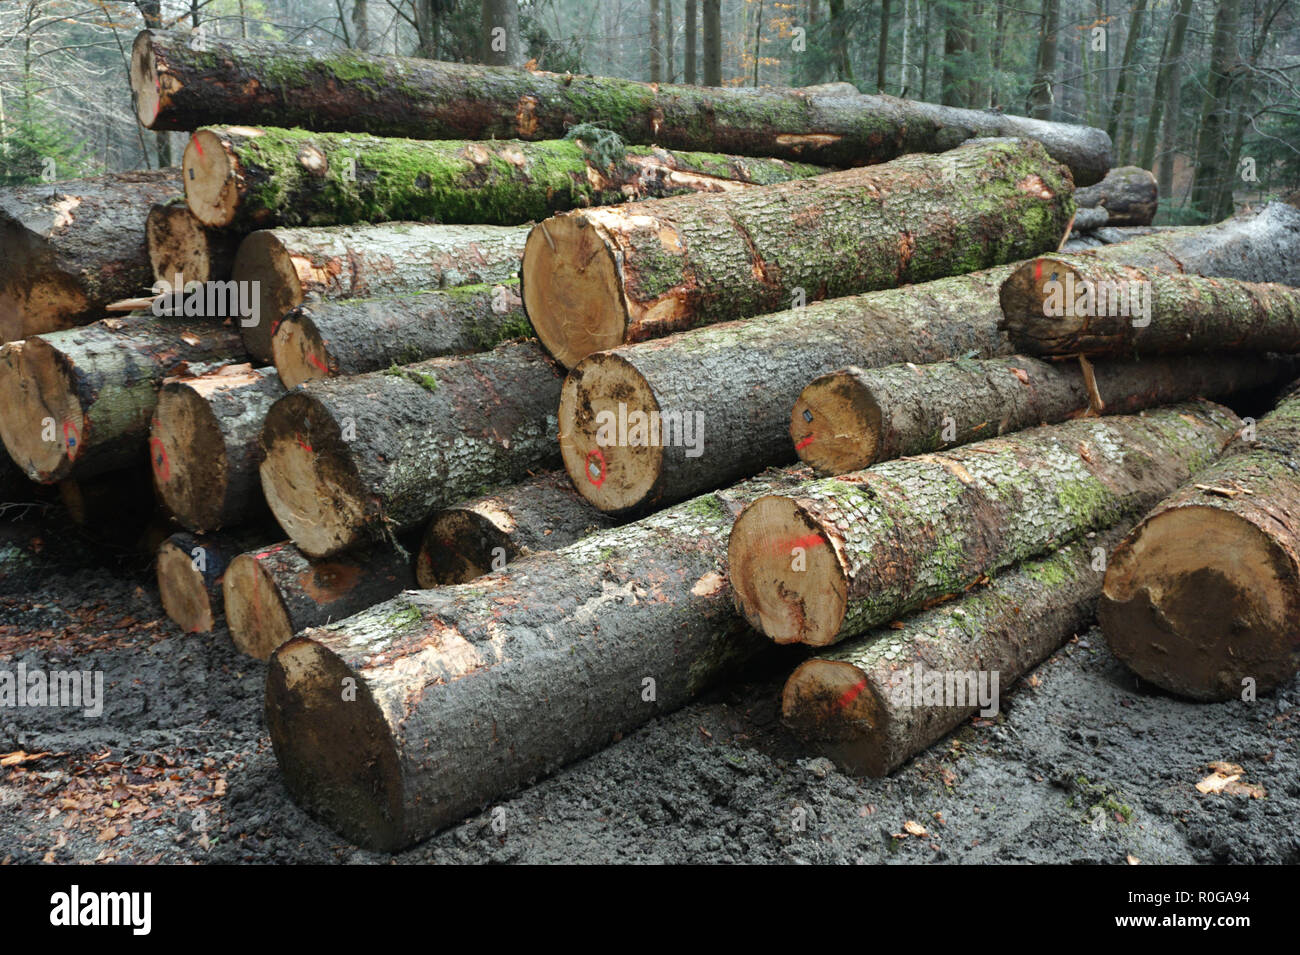 A pile of wooden logs stacked up and prepares for the wood industry Stock Photo